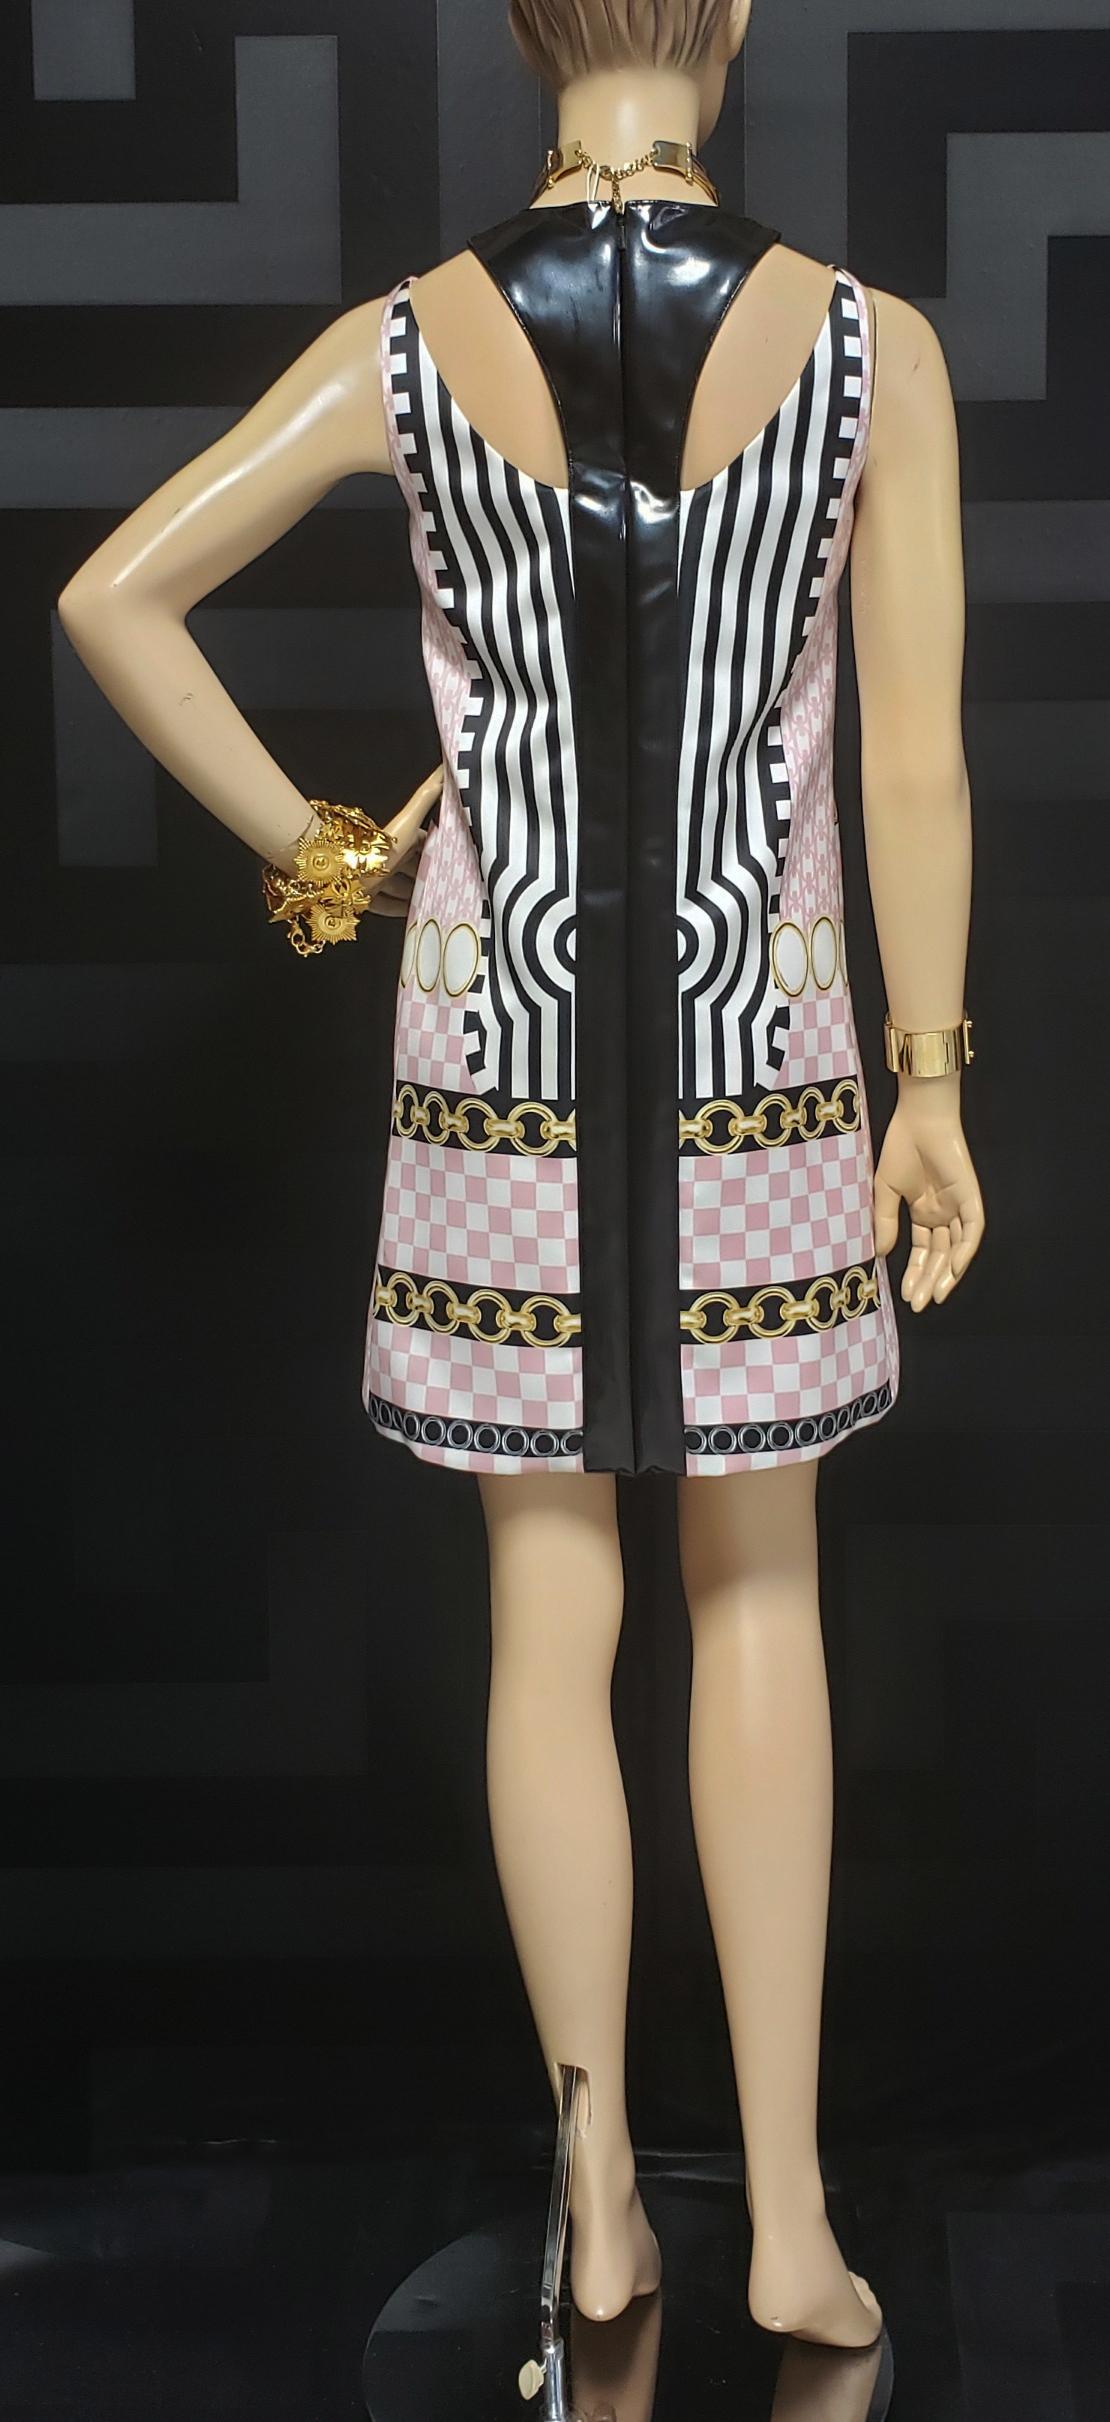 Women's S/2015 look #13 NEW VERSACE PINK MINI DRESS W/ PATENT LEATHER DETAIL 38 - 4